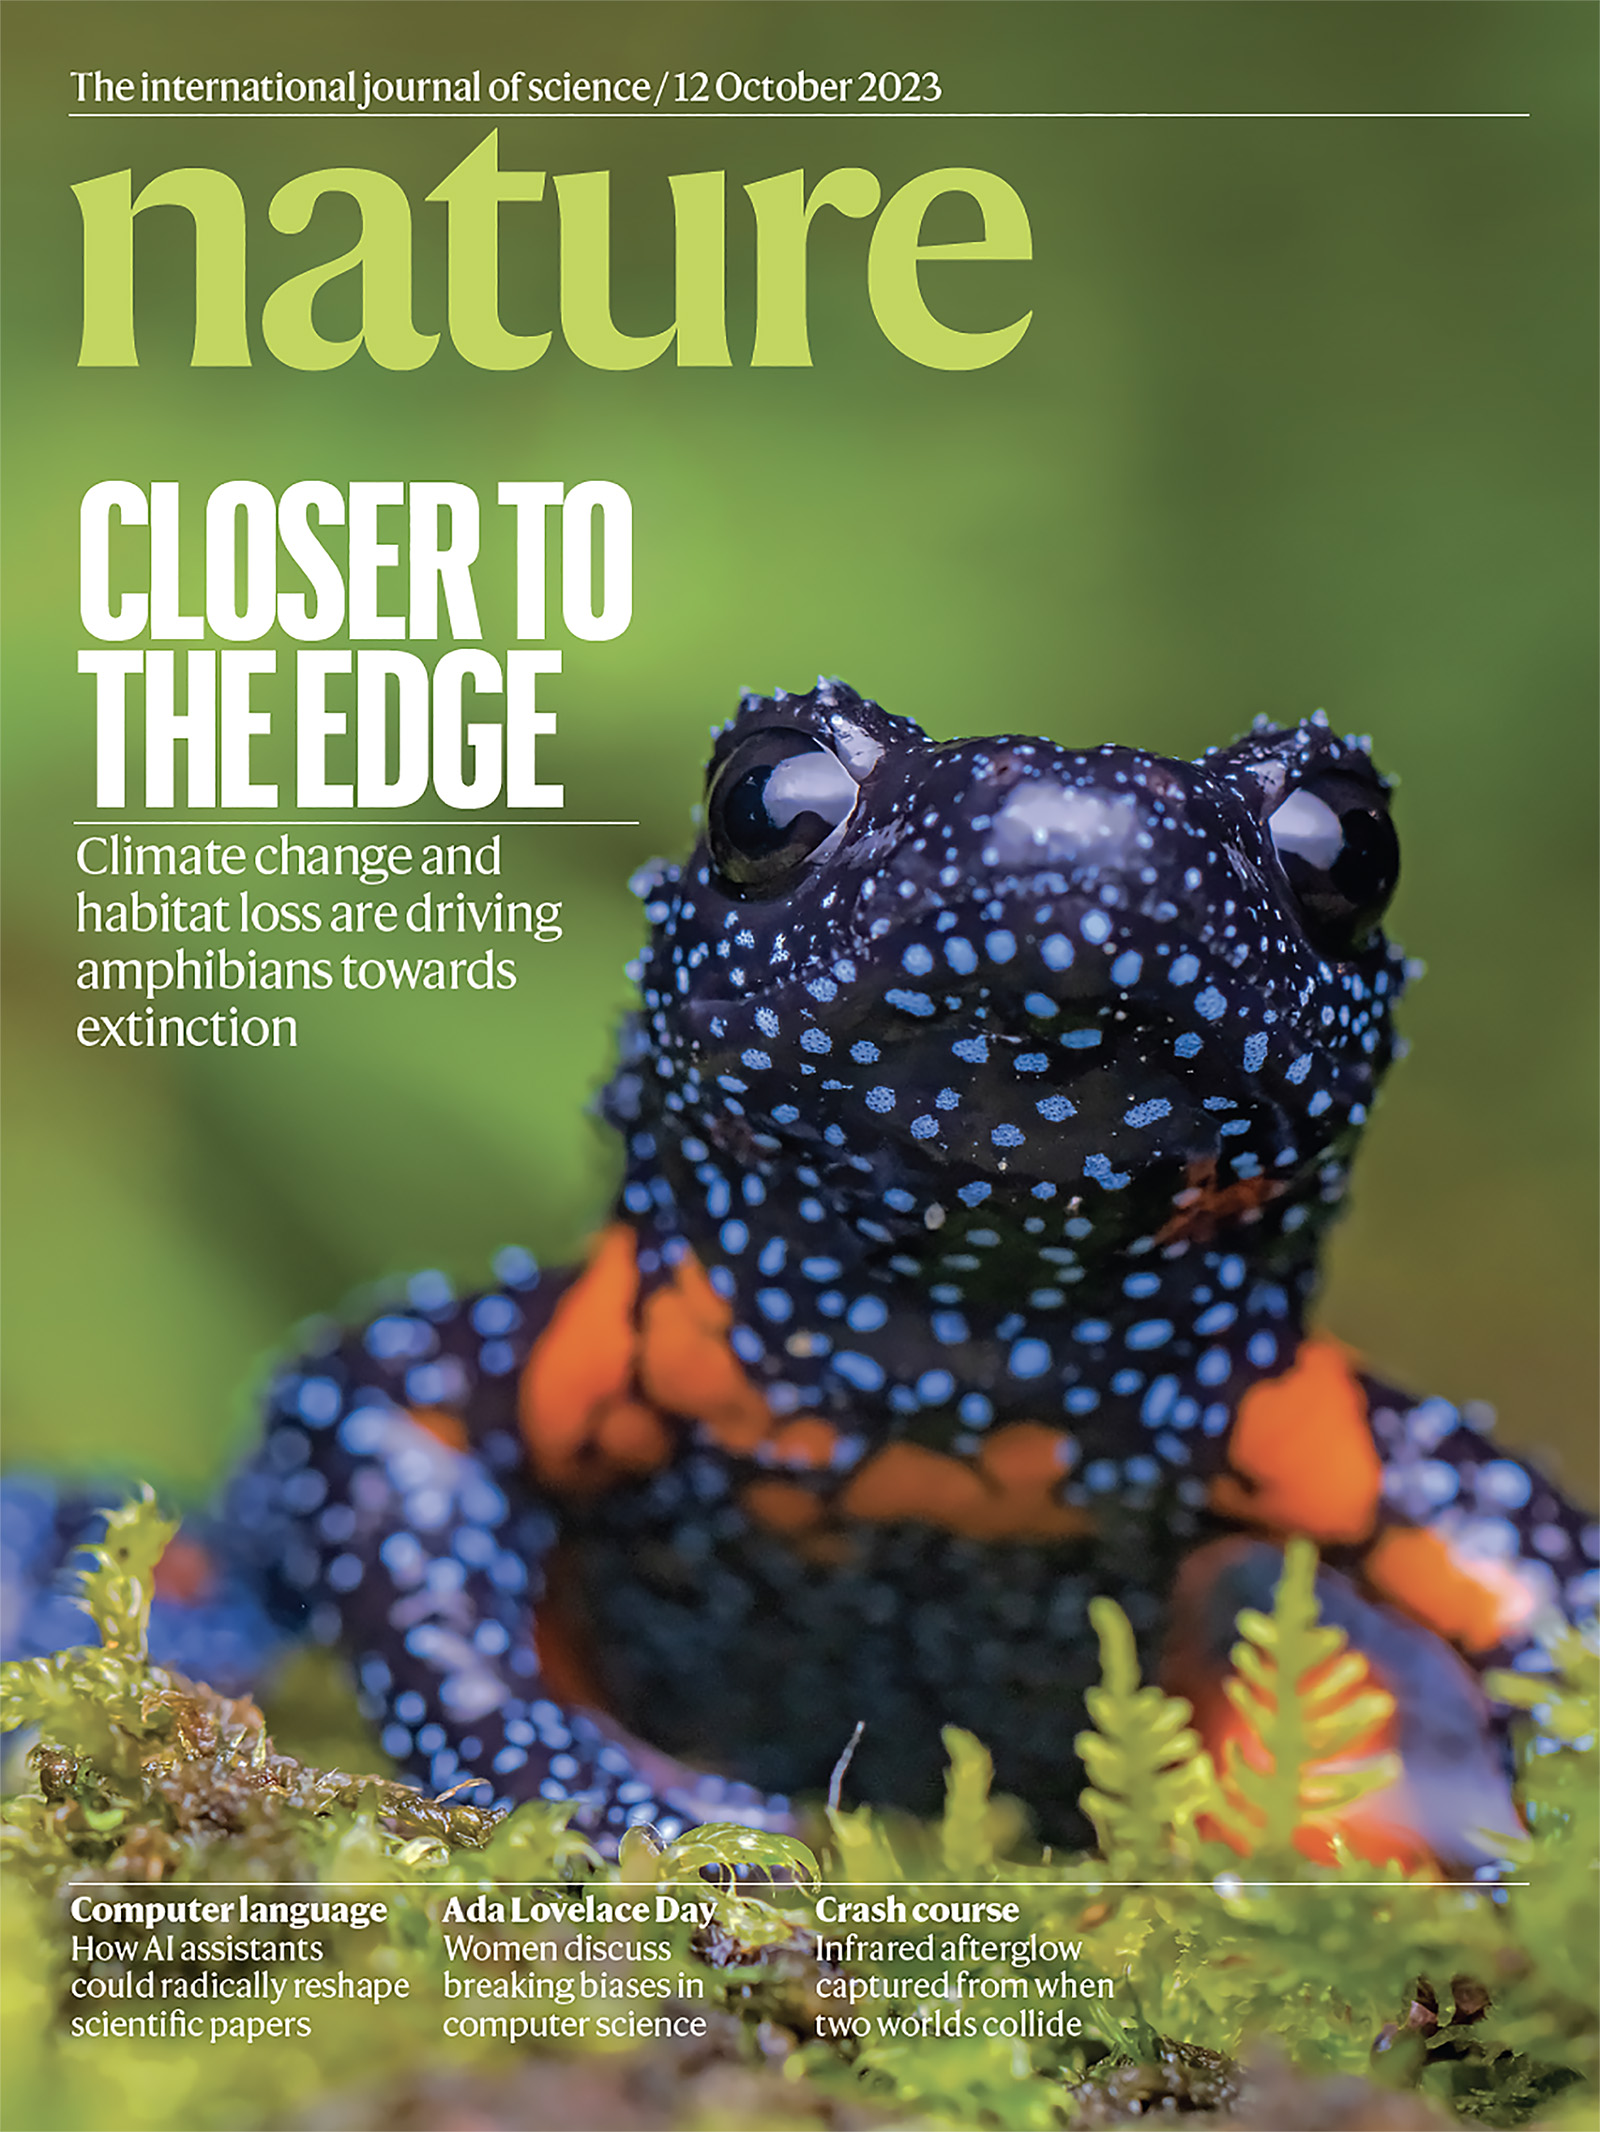 Nature Cover October 12, 2023: a black microhylid frog (Melanobatrachus indicus), a rare species from the Western Ghats of India. Photo by Sandeep Das